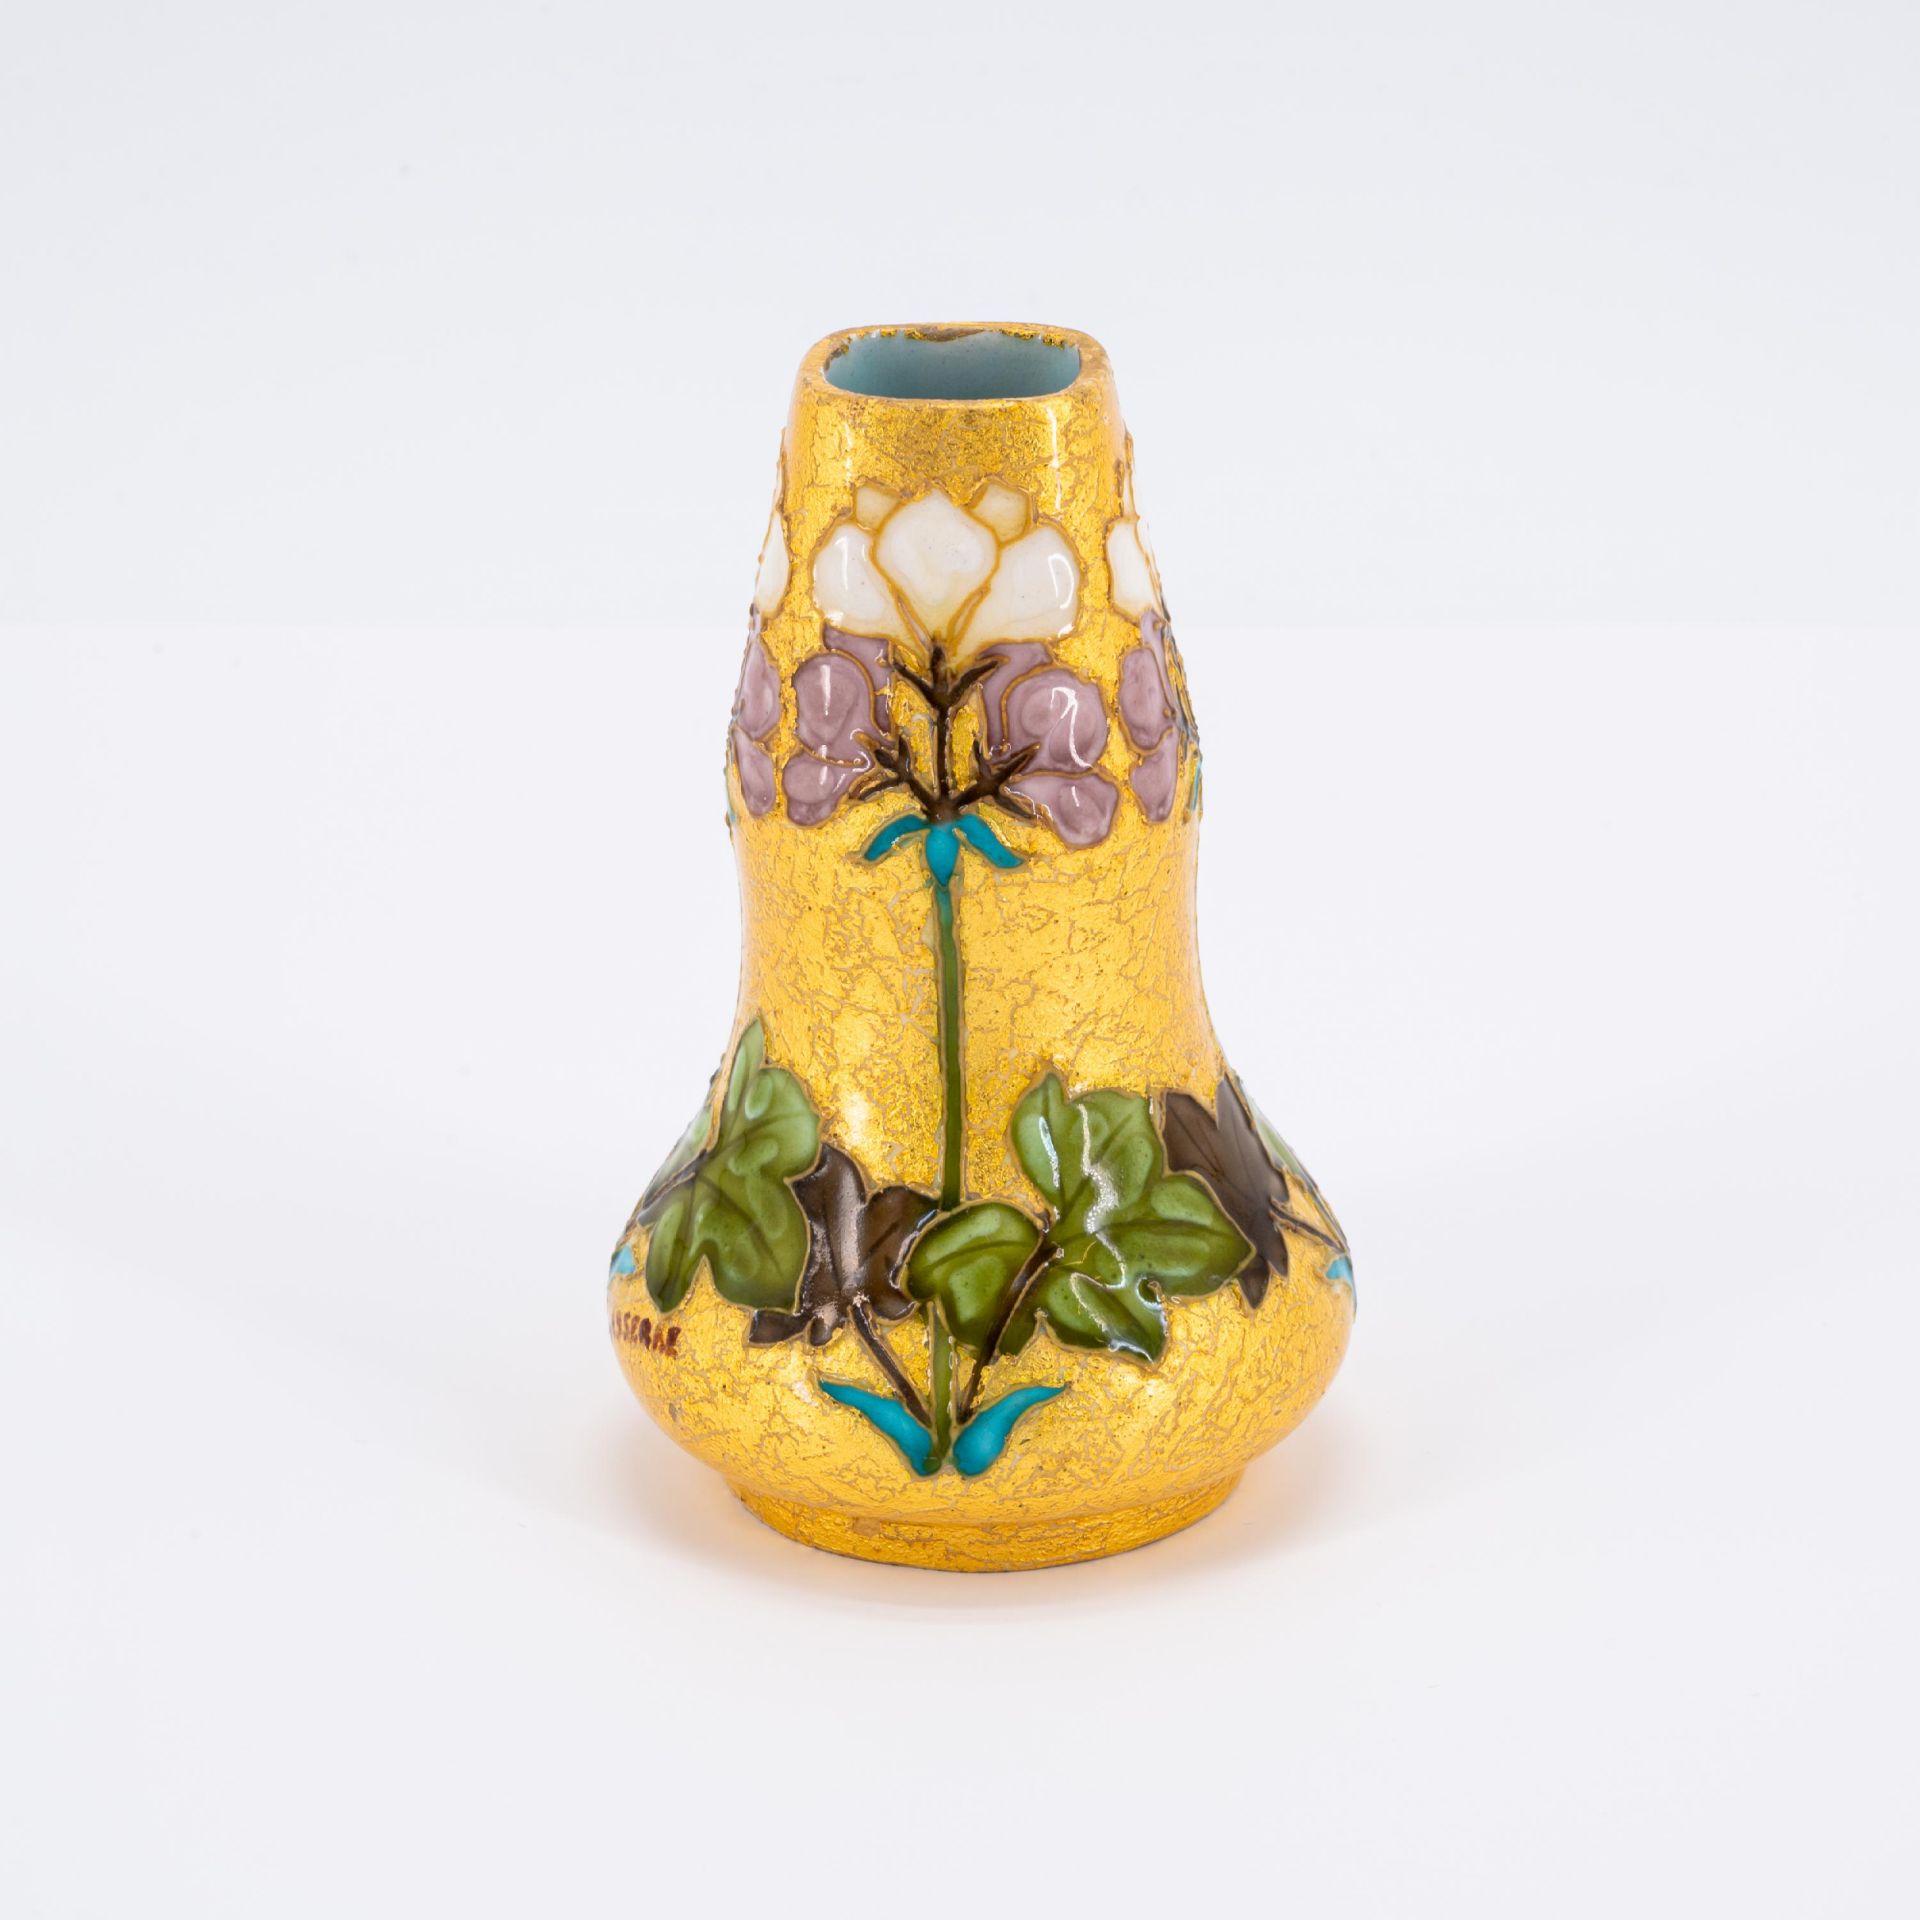 Small vase with floral decor - Image 2 of 7